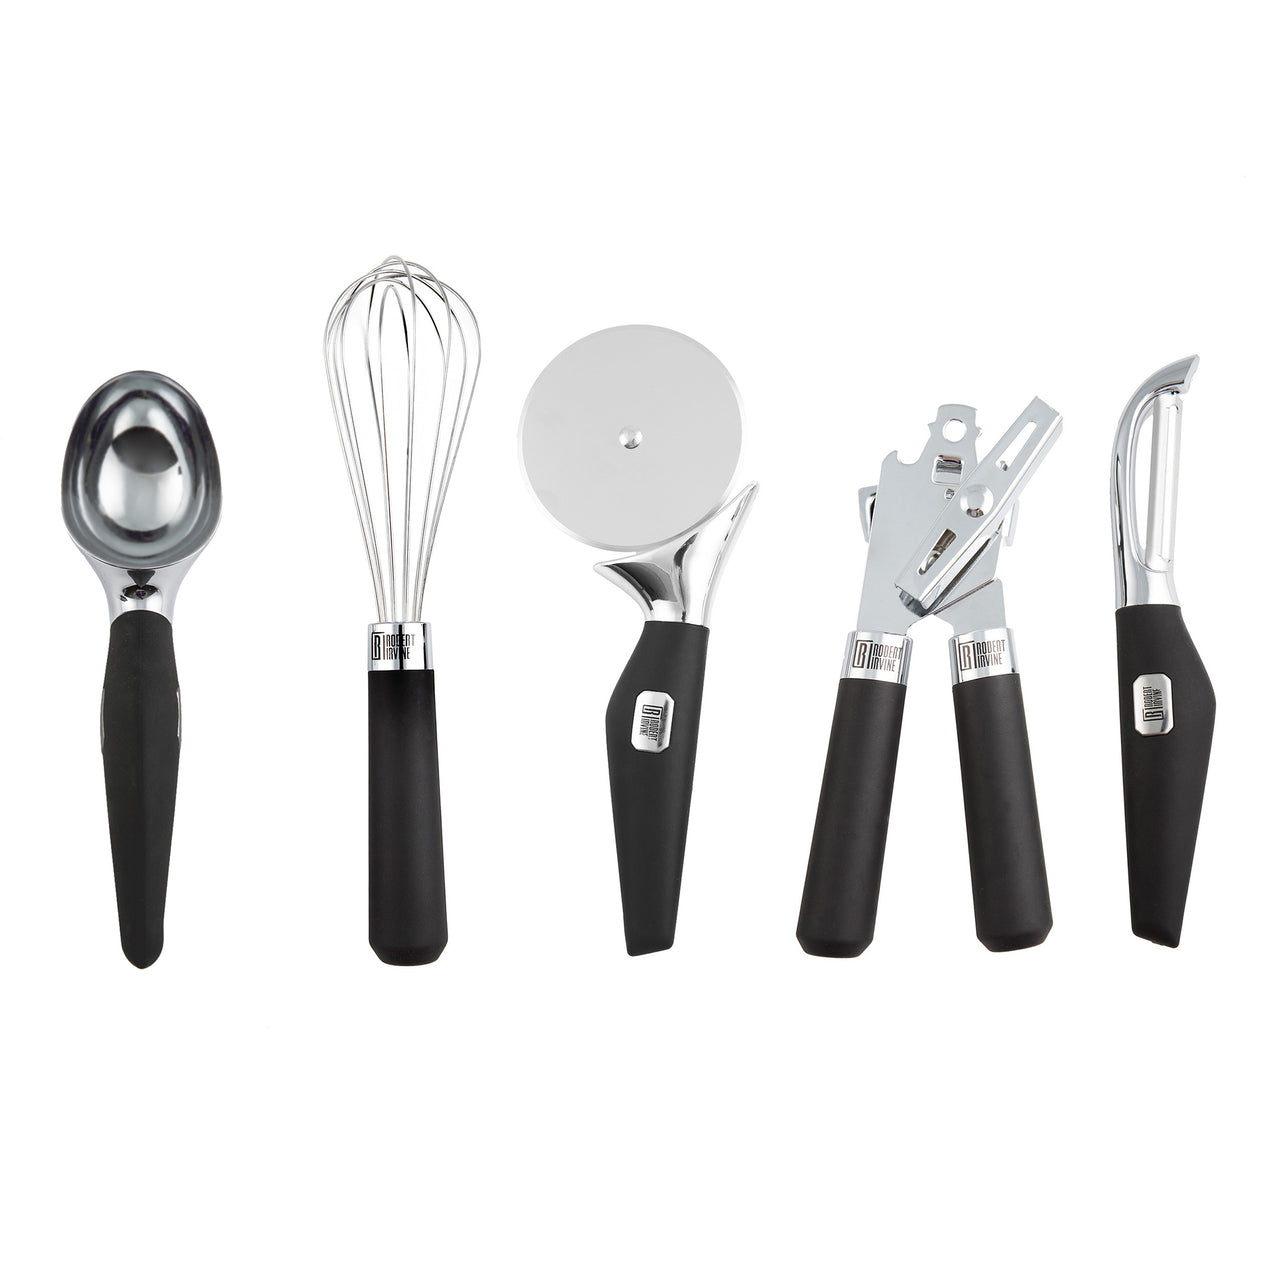 Chef's Shoppe Gourmet Kitchen Store - An essential in any kitchen